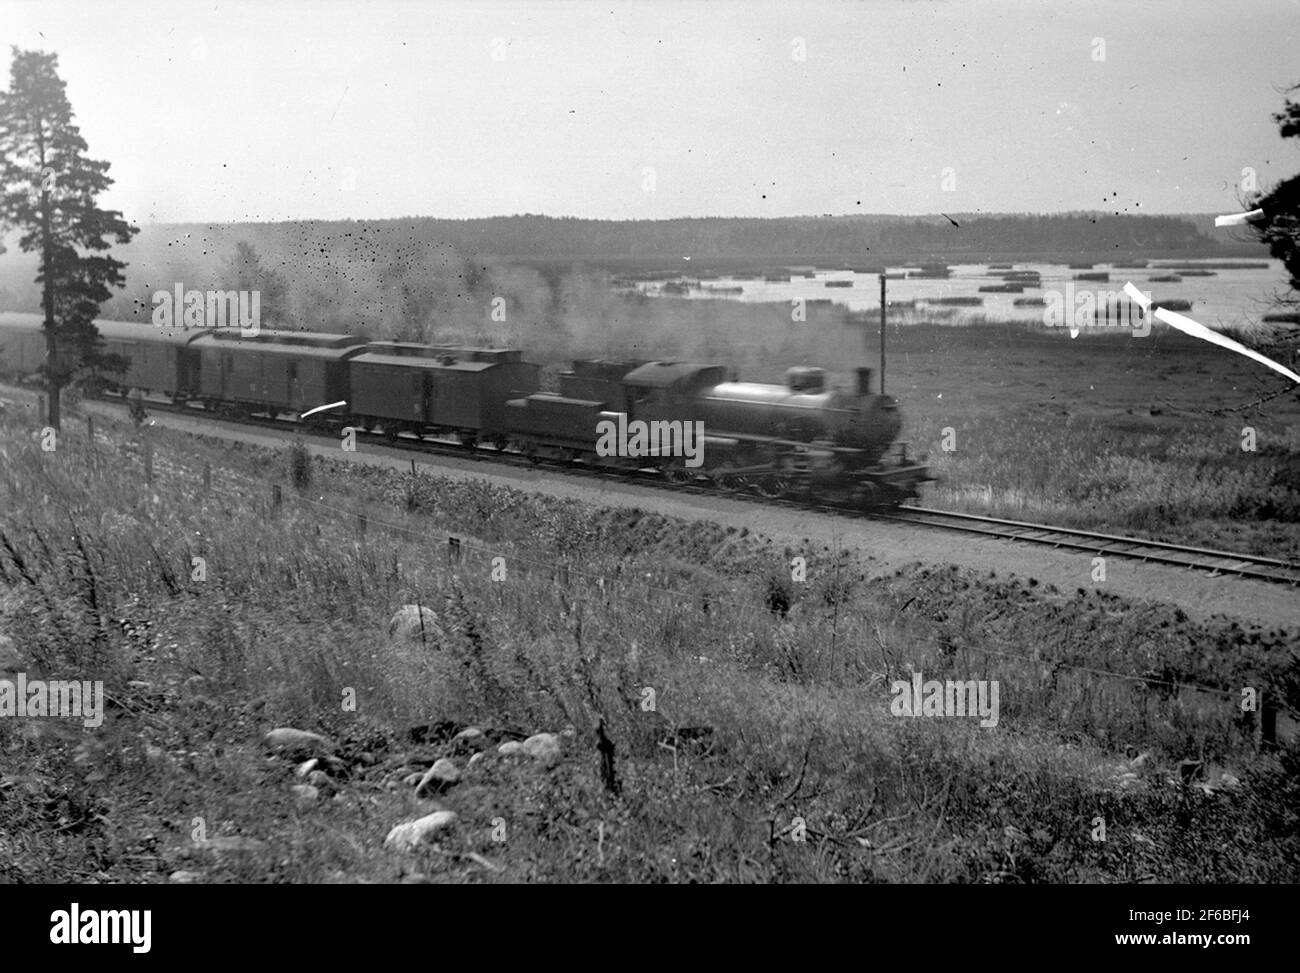 The state railways SJ B, with passenger train 414 on the line just north of Hille, Mårdängsjön's Bankeeper. The carriages are a catcher SJ C7B, previous SJ E3. Then a post cart SJ D01 later D022 originally from SWB.TT Stock Photo